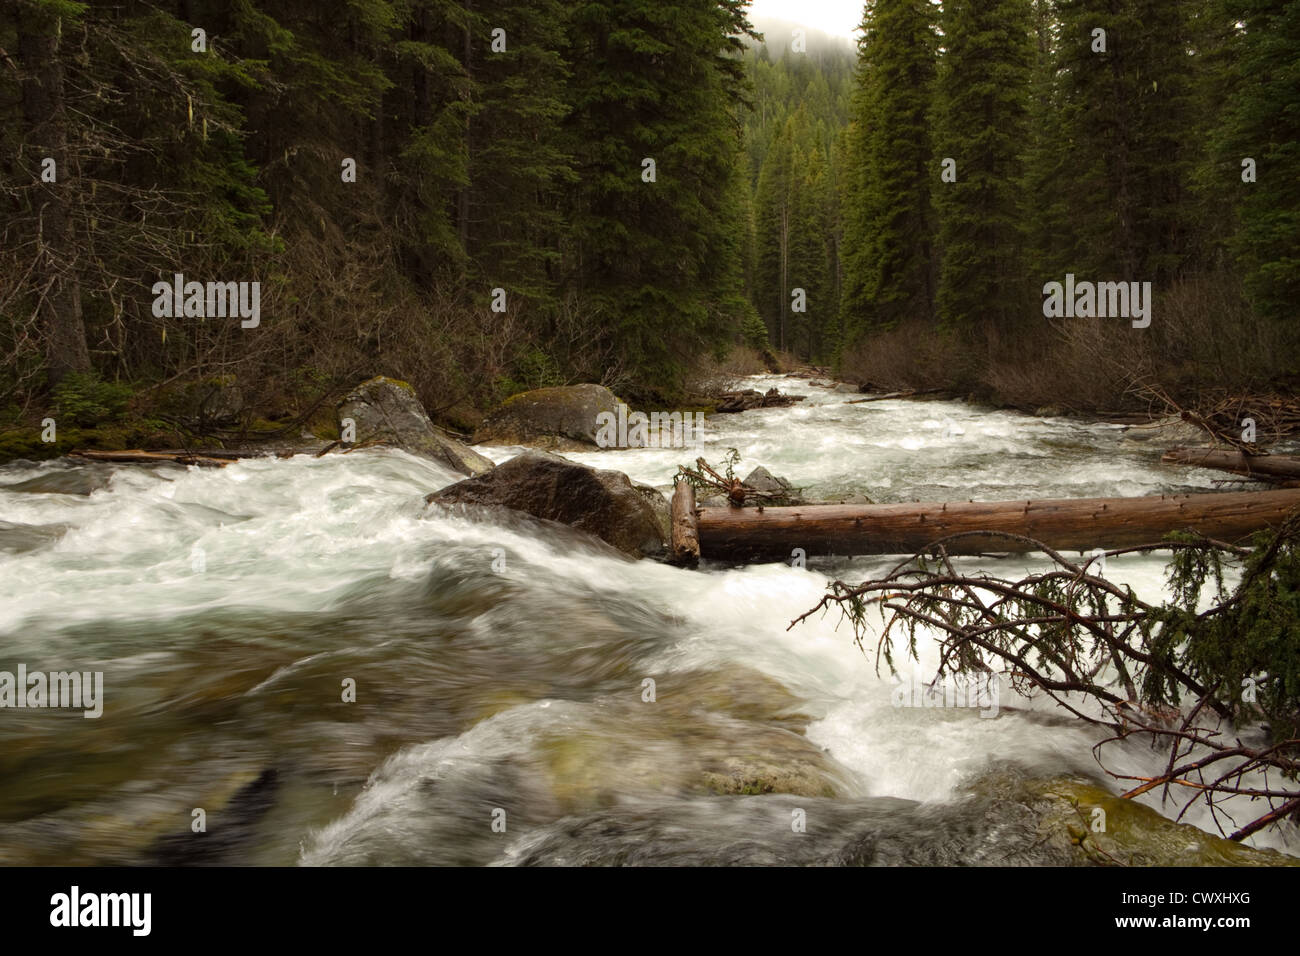 RAGING RIVER FLOWING THROUGH A PINE FOREST Stock Photo